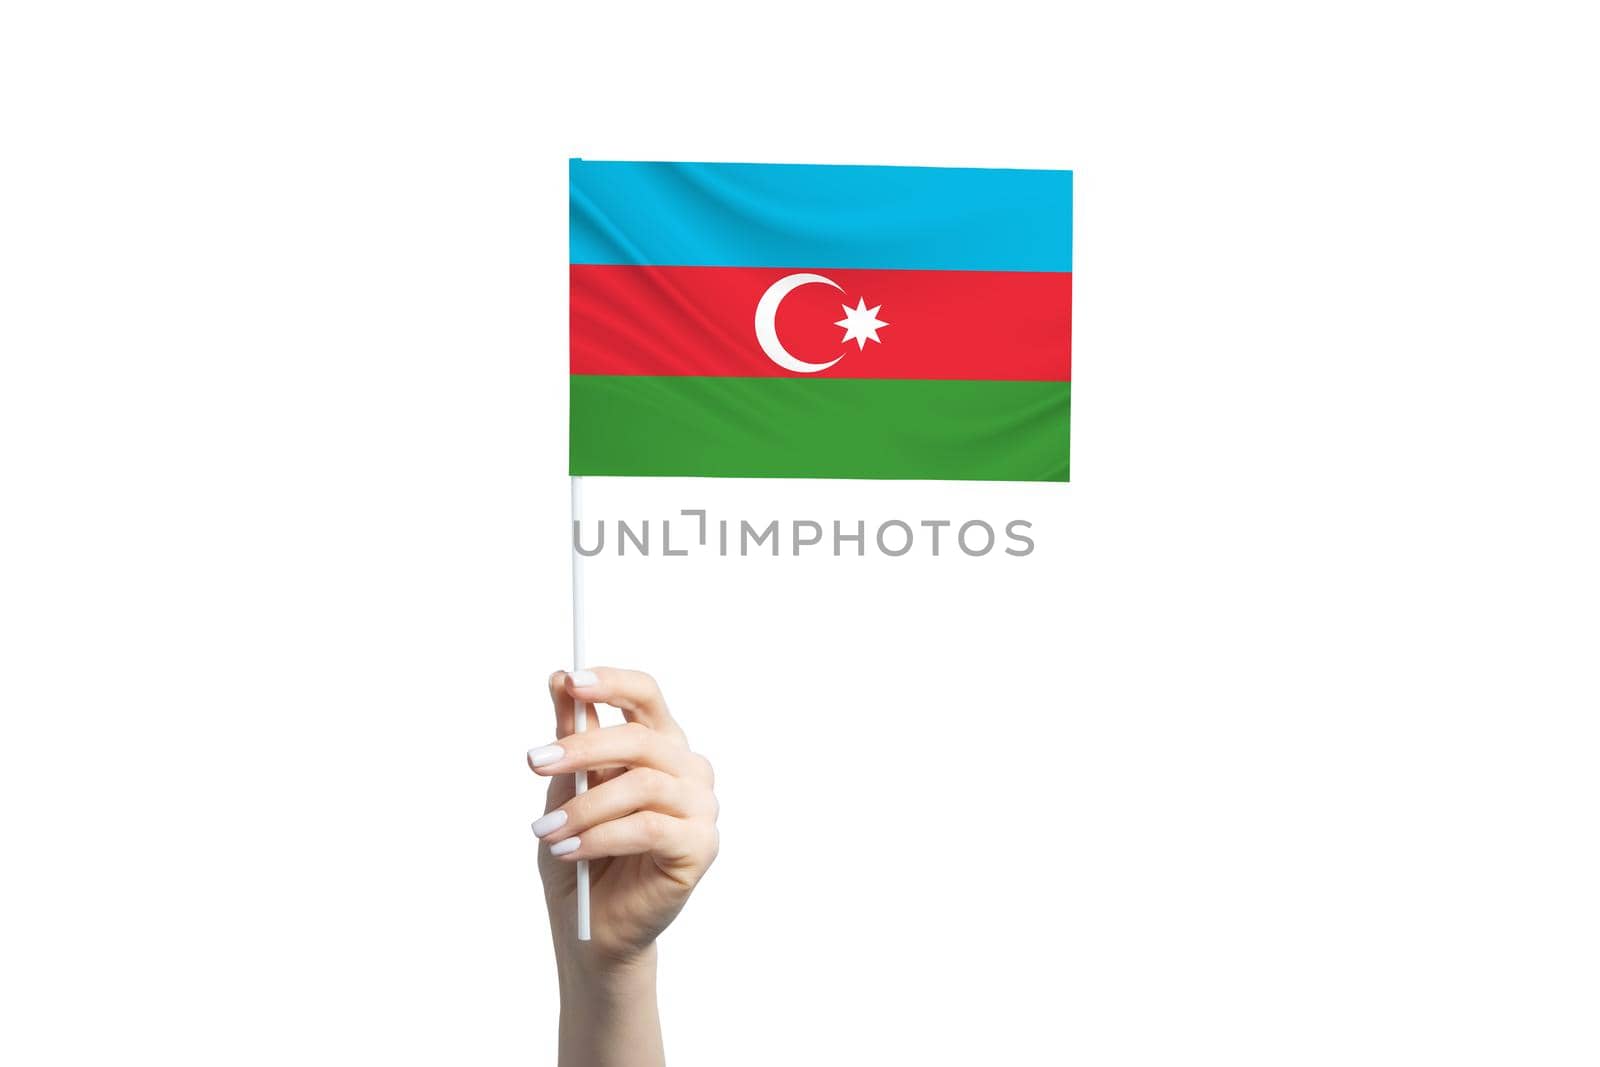 A beautiful female hand holds a Azerbaijan flag to which she shows the finger of her other hand, isolated on white background.